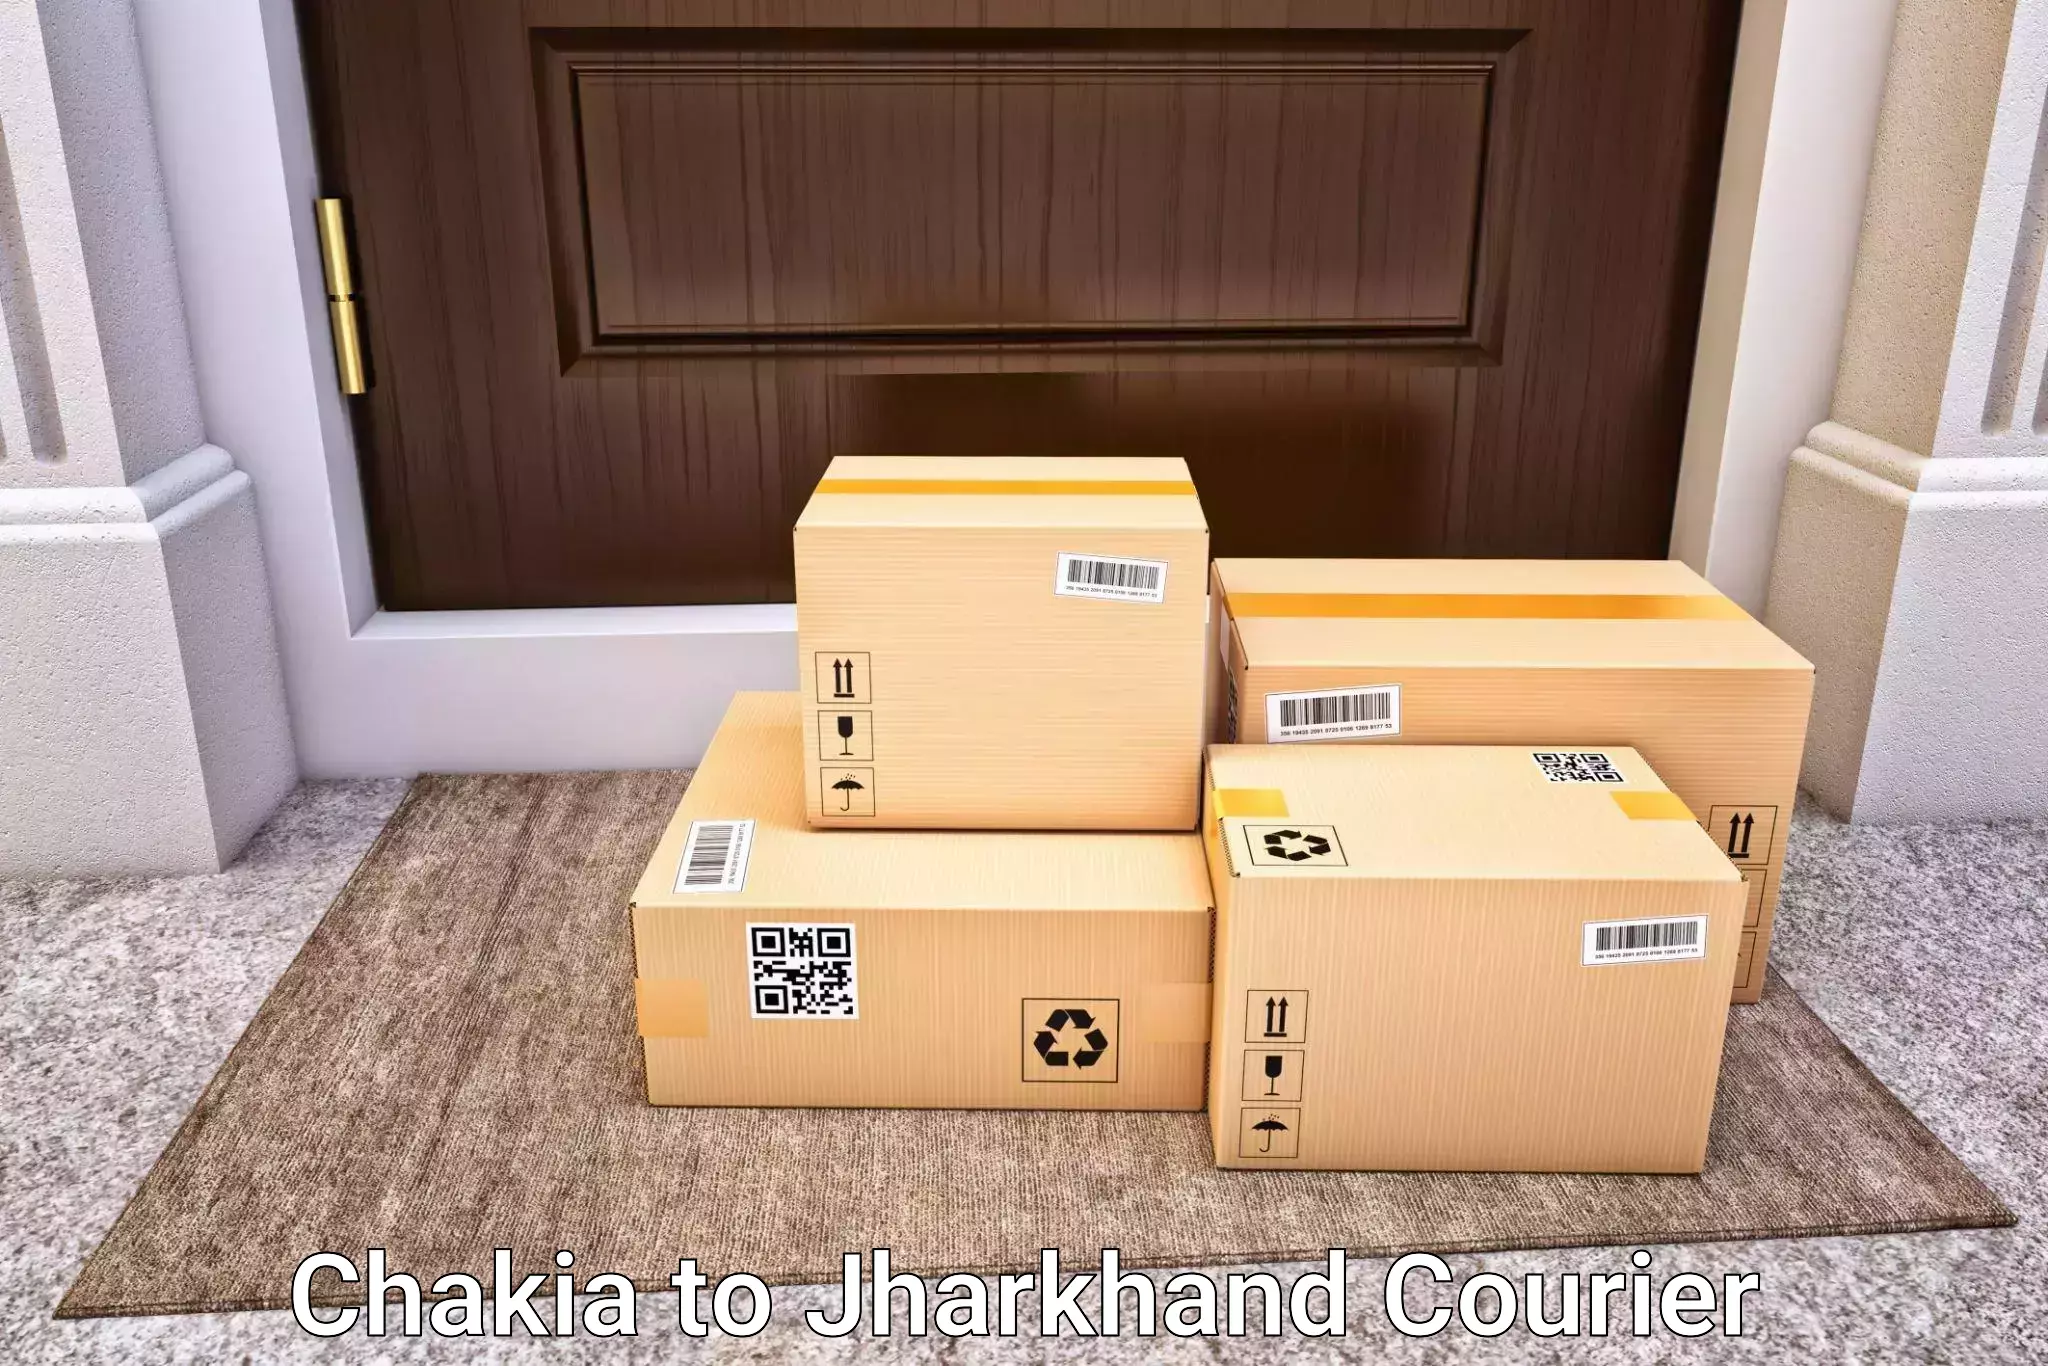 Airport luggage delivery Chakia to Jamshedpur